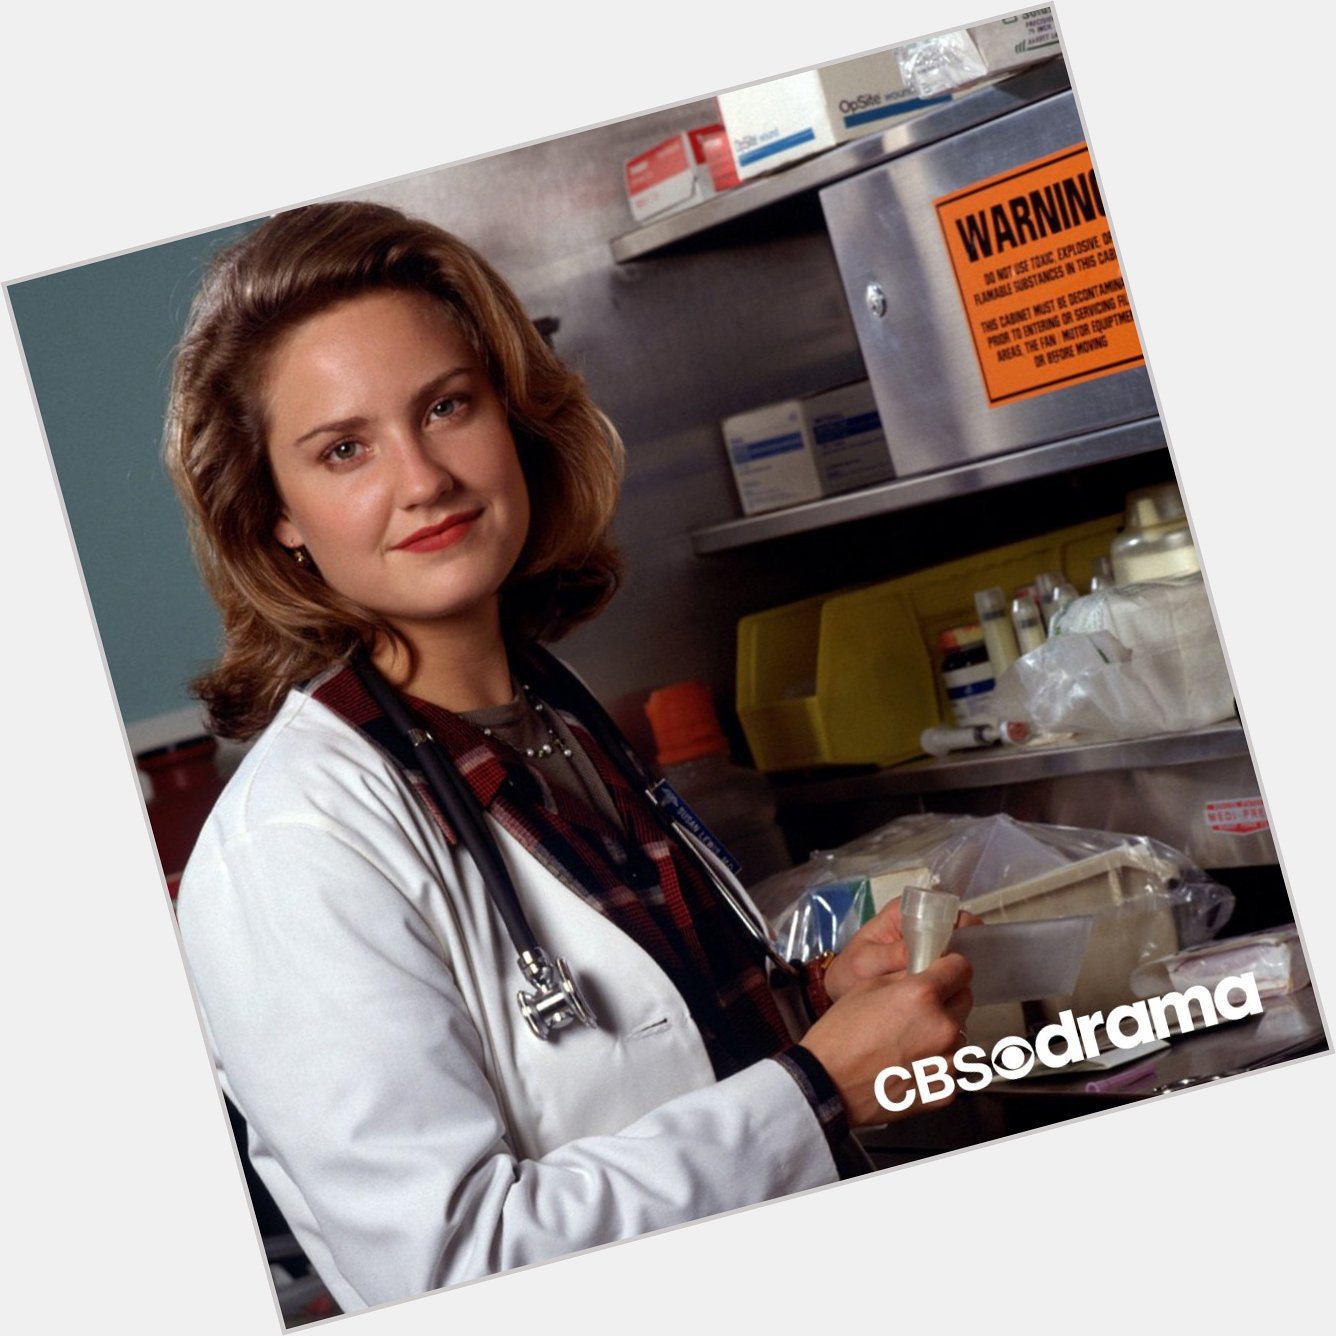 Rooting for the no-nonsense Dr. Susan Lewis - happy birthday to Sherry Stringfield! 